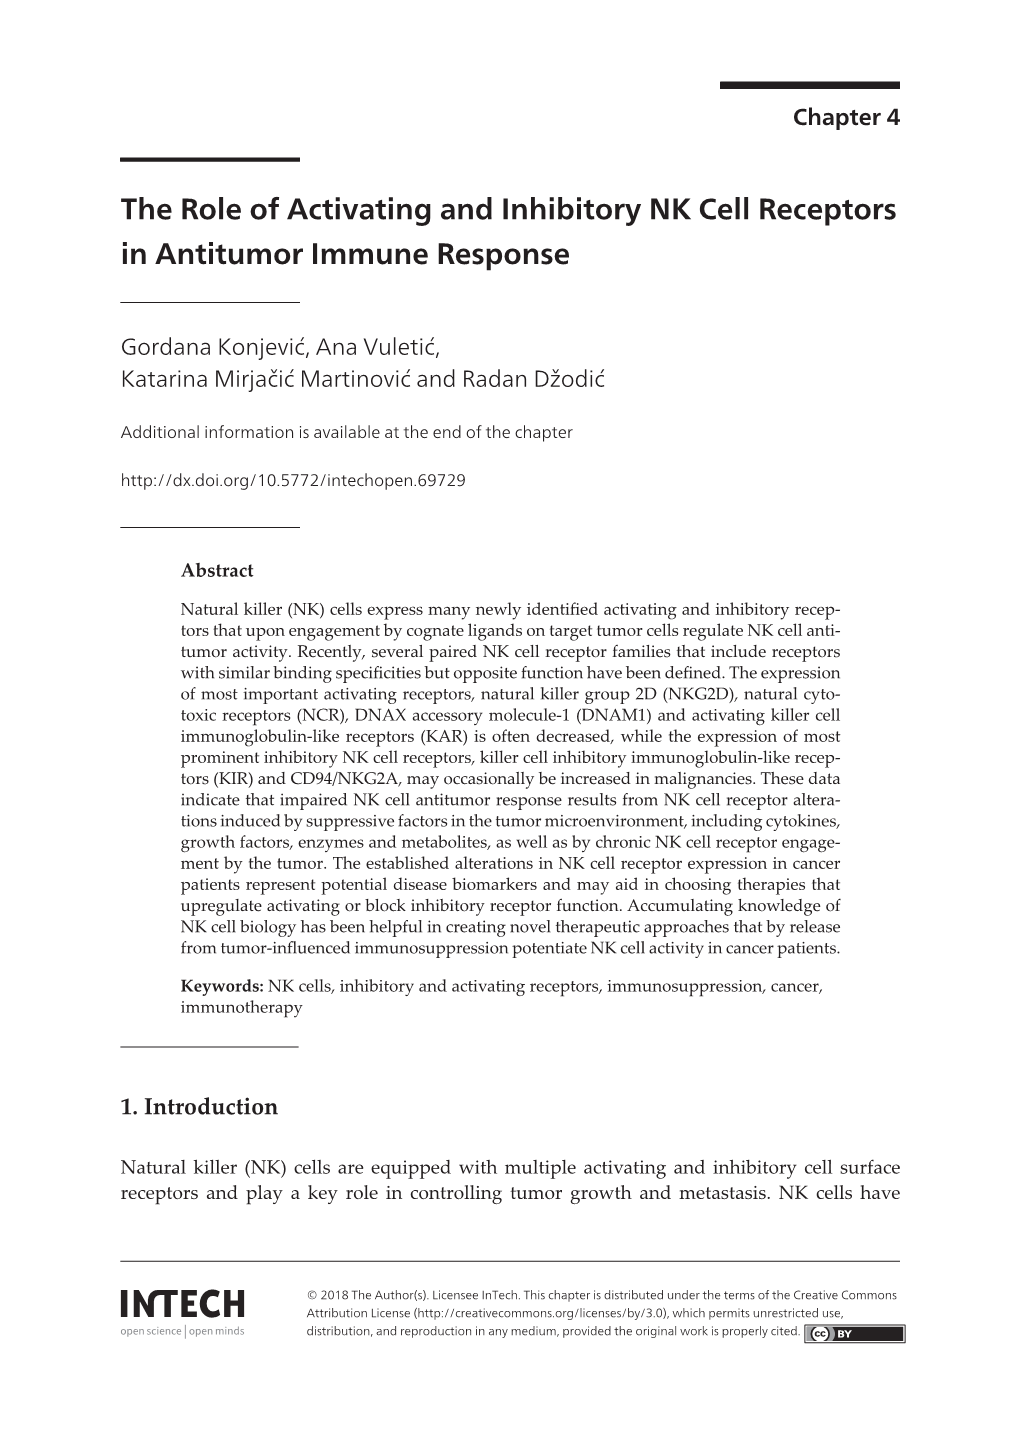 The Role of Activating and Inhibitory NK Cell Receptors in Antitumor Immune Response 51